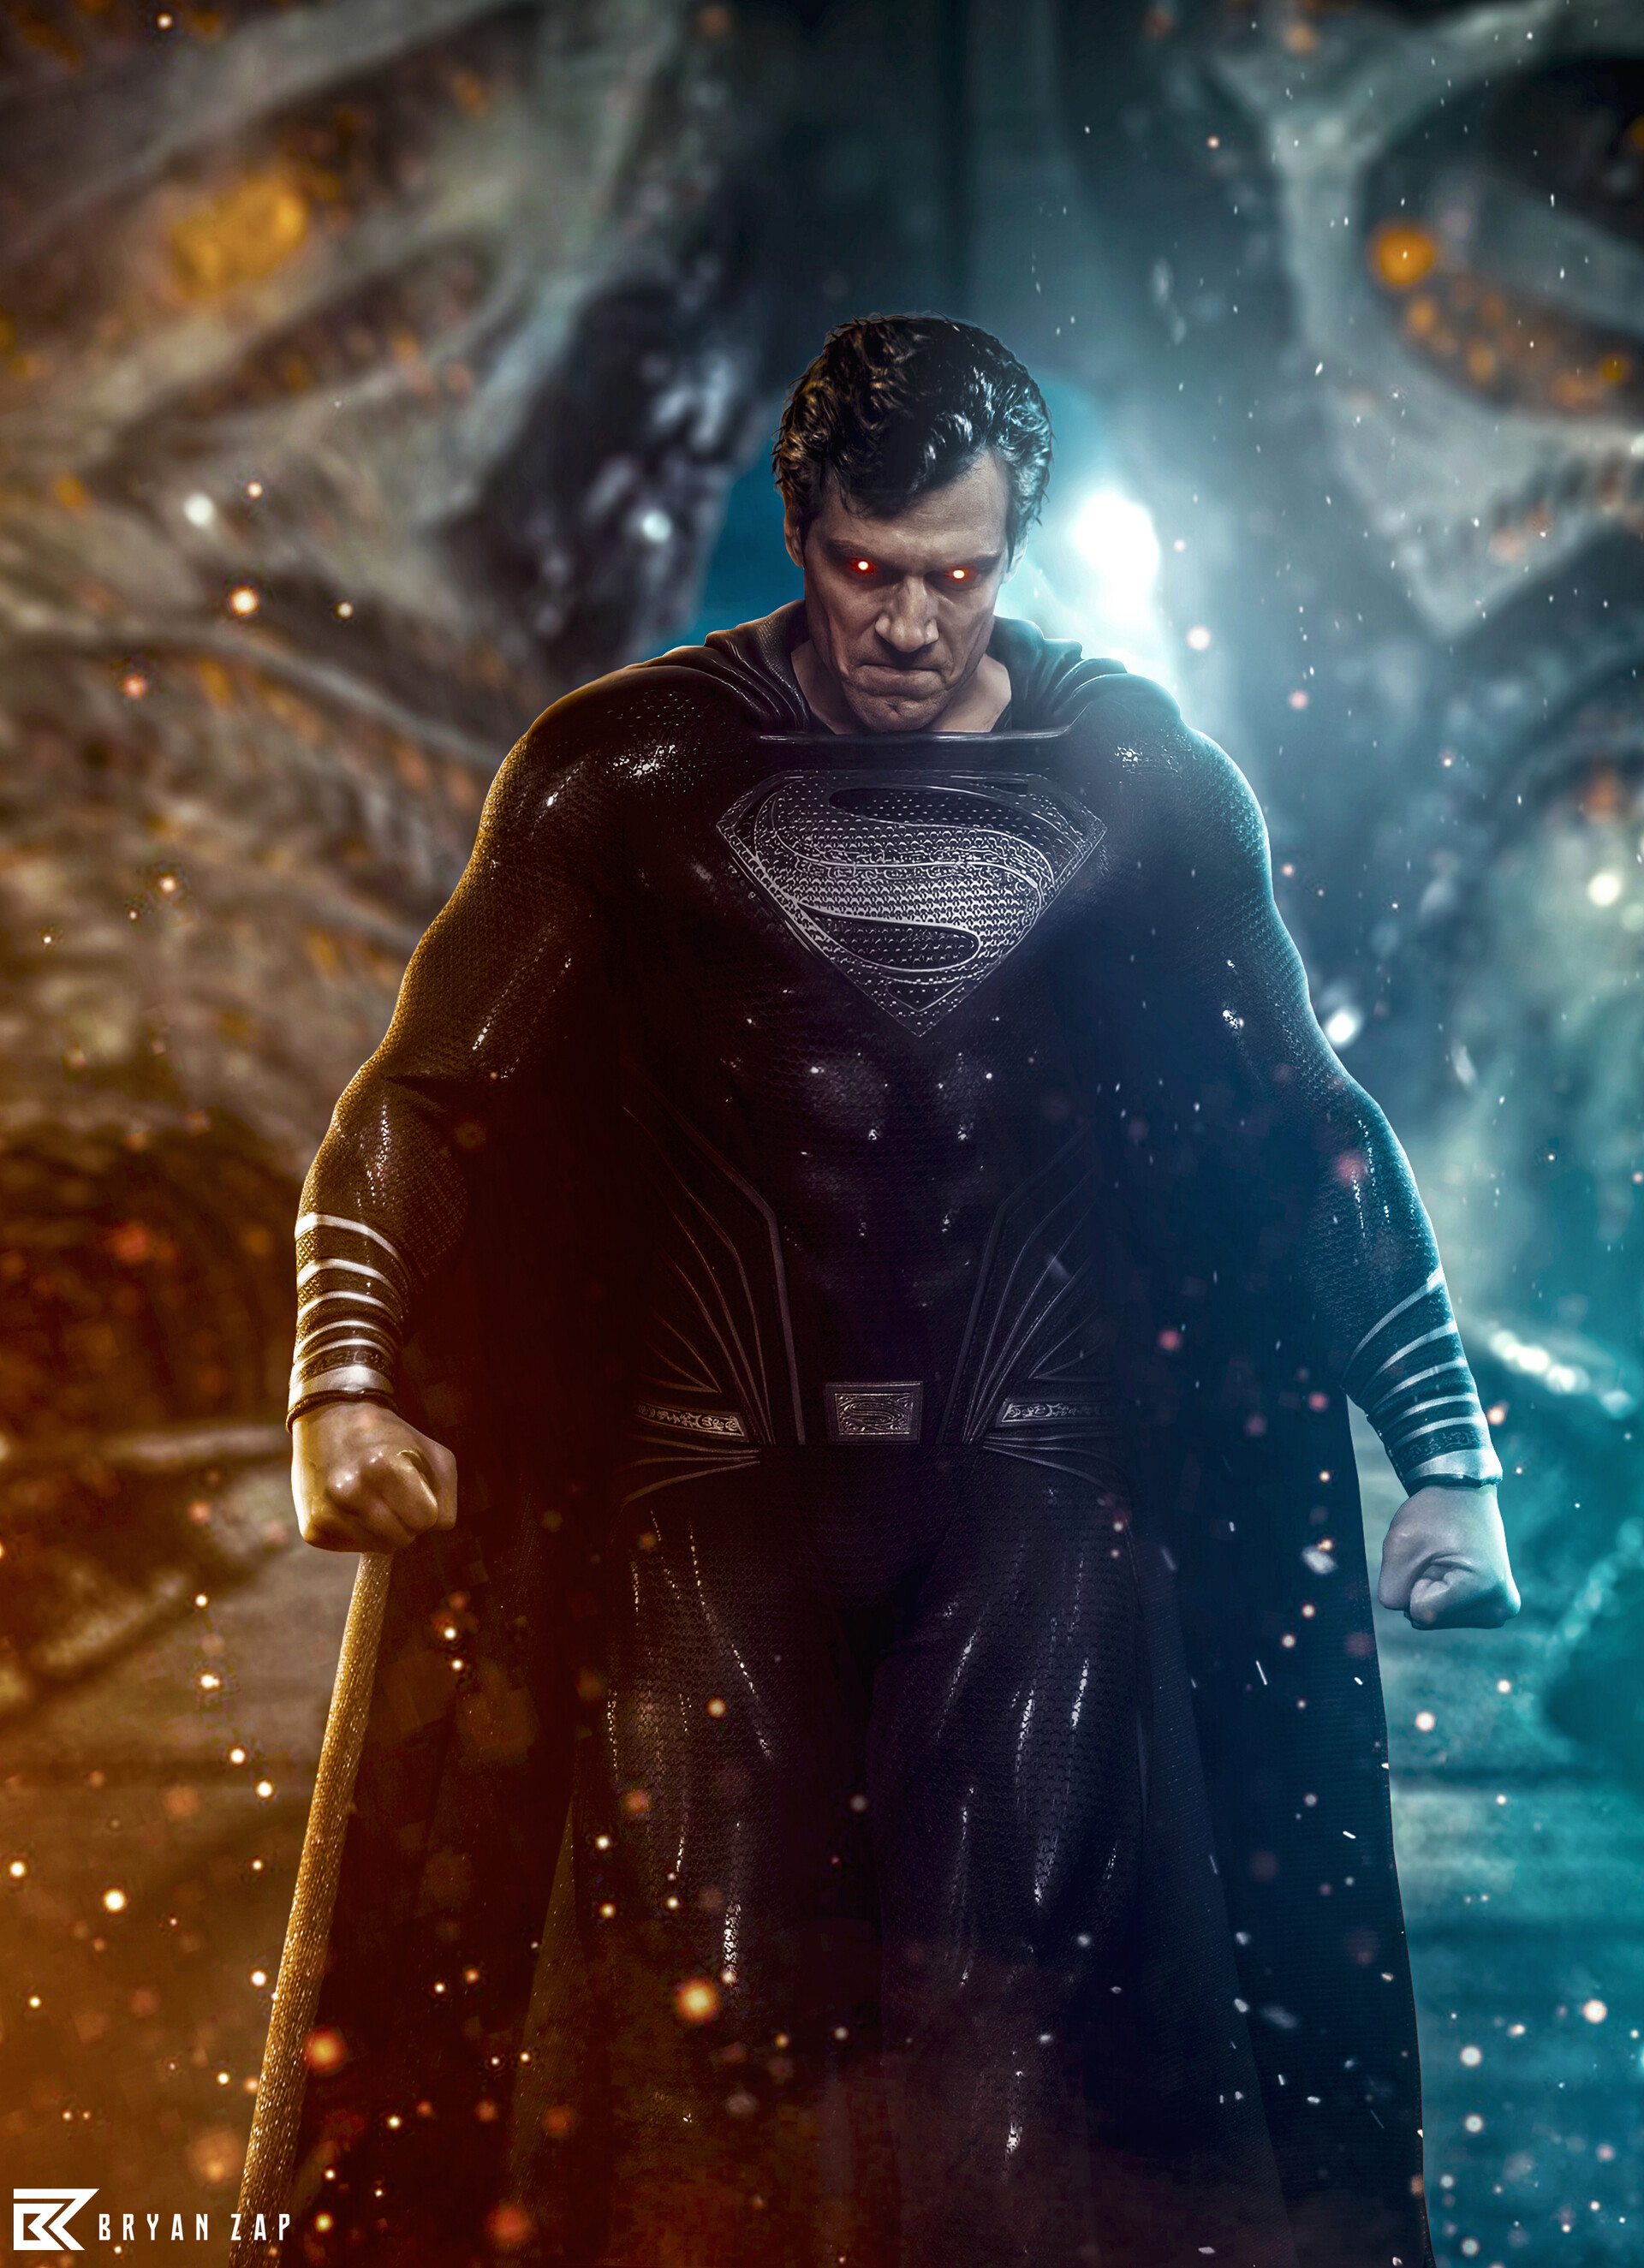 Superman's Black Suit In Zack Snyder's Justice League Was Digital | 411MANIA